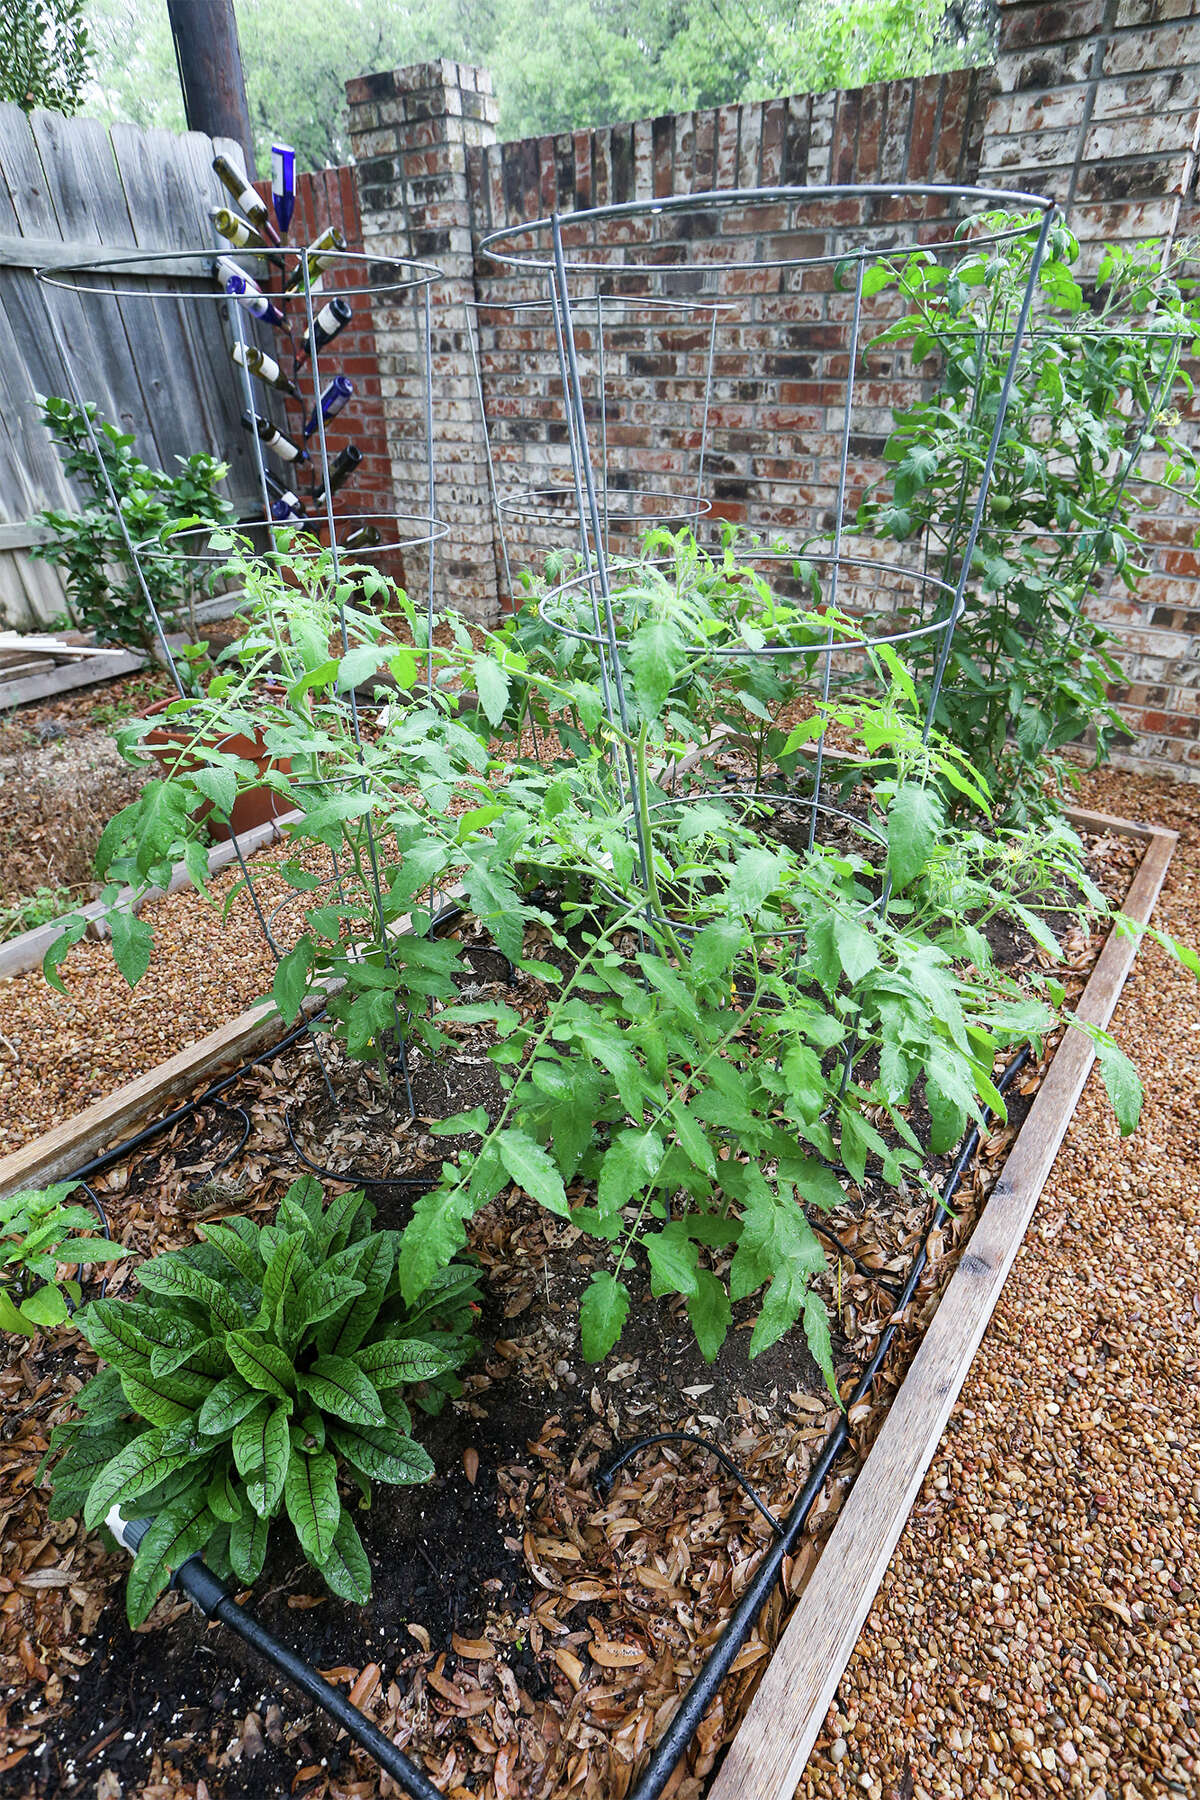 Stephanie Lanier has planted Juliet, Valley Cat and Tycoon tomato plants in this raised bed in her garden on Sunday, May 25, 2014. MARVIN PFEIFFER/ mpfeiffer@express-news.net